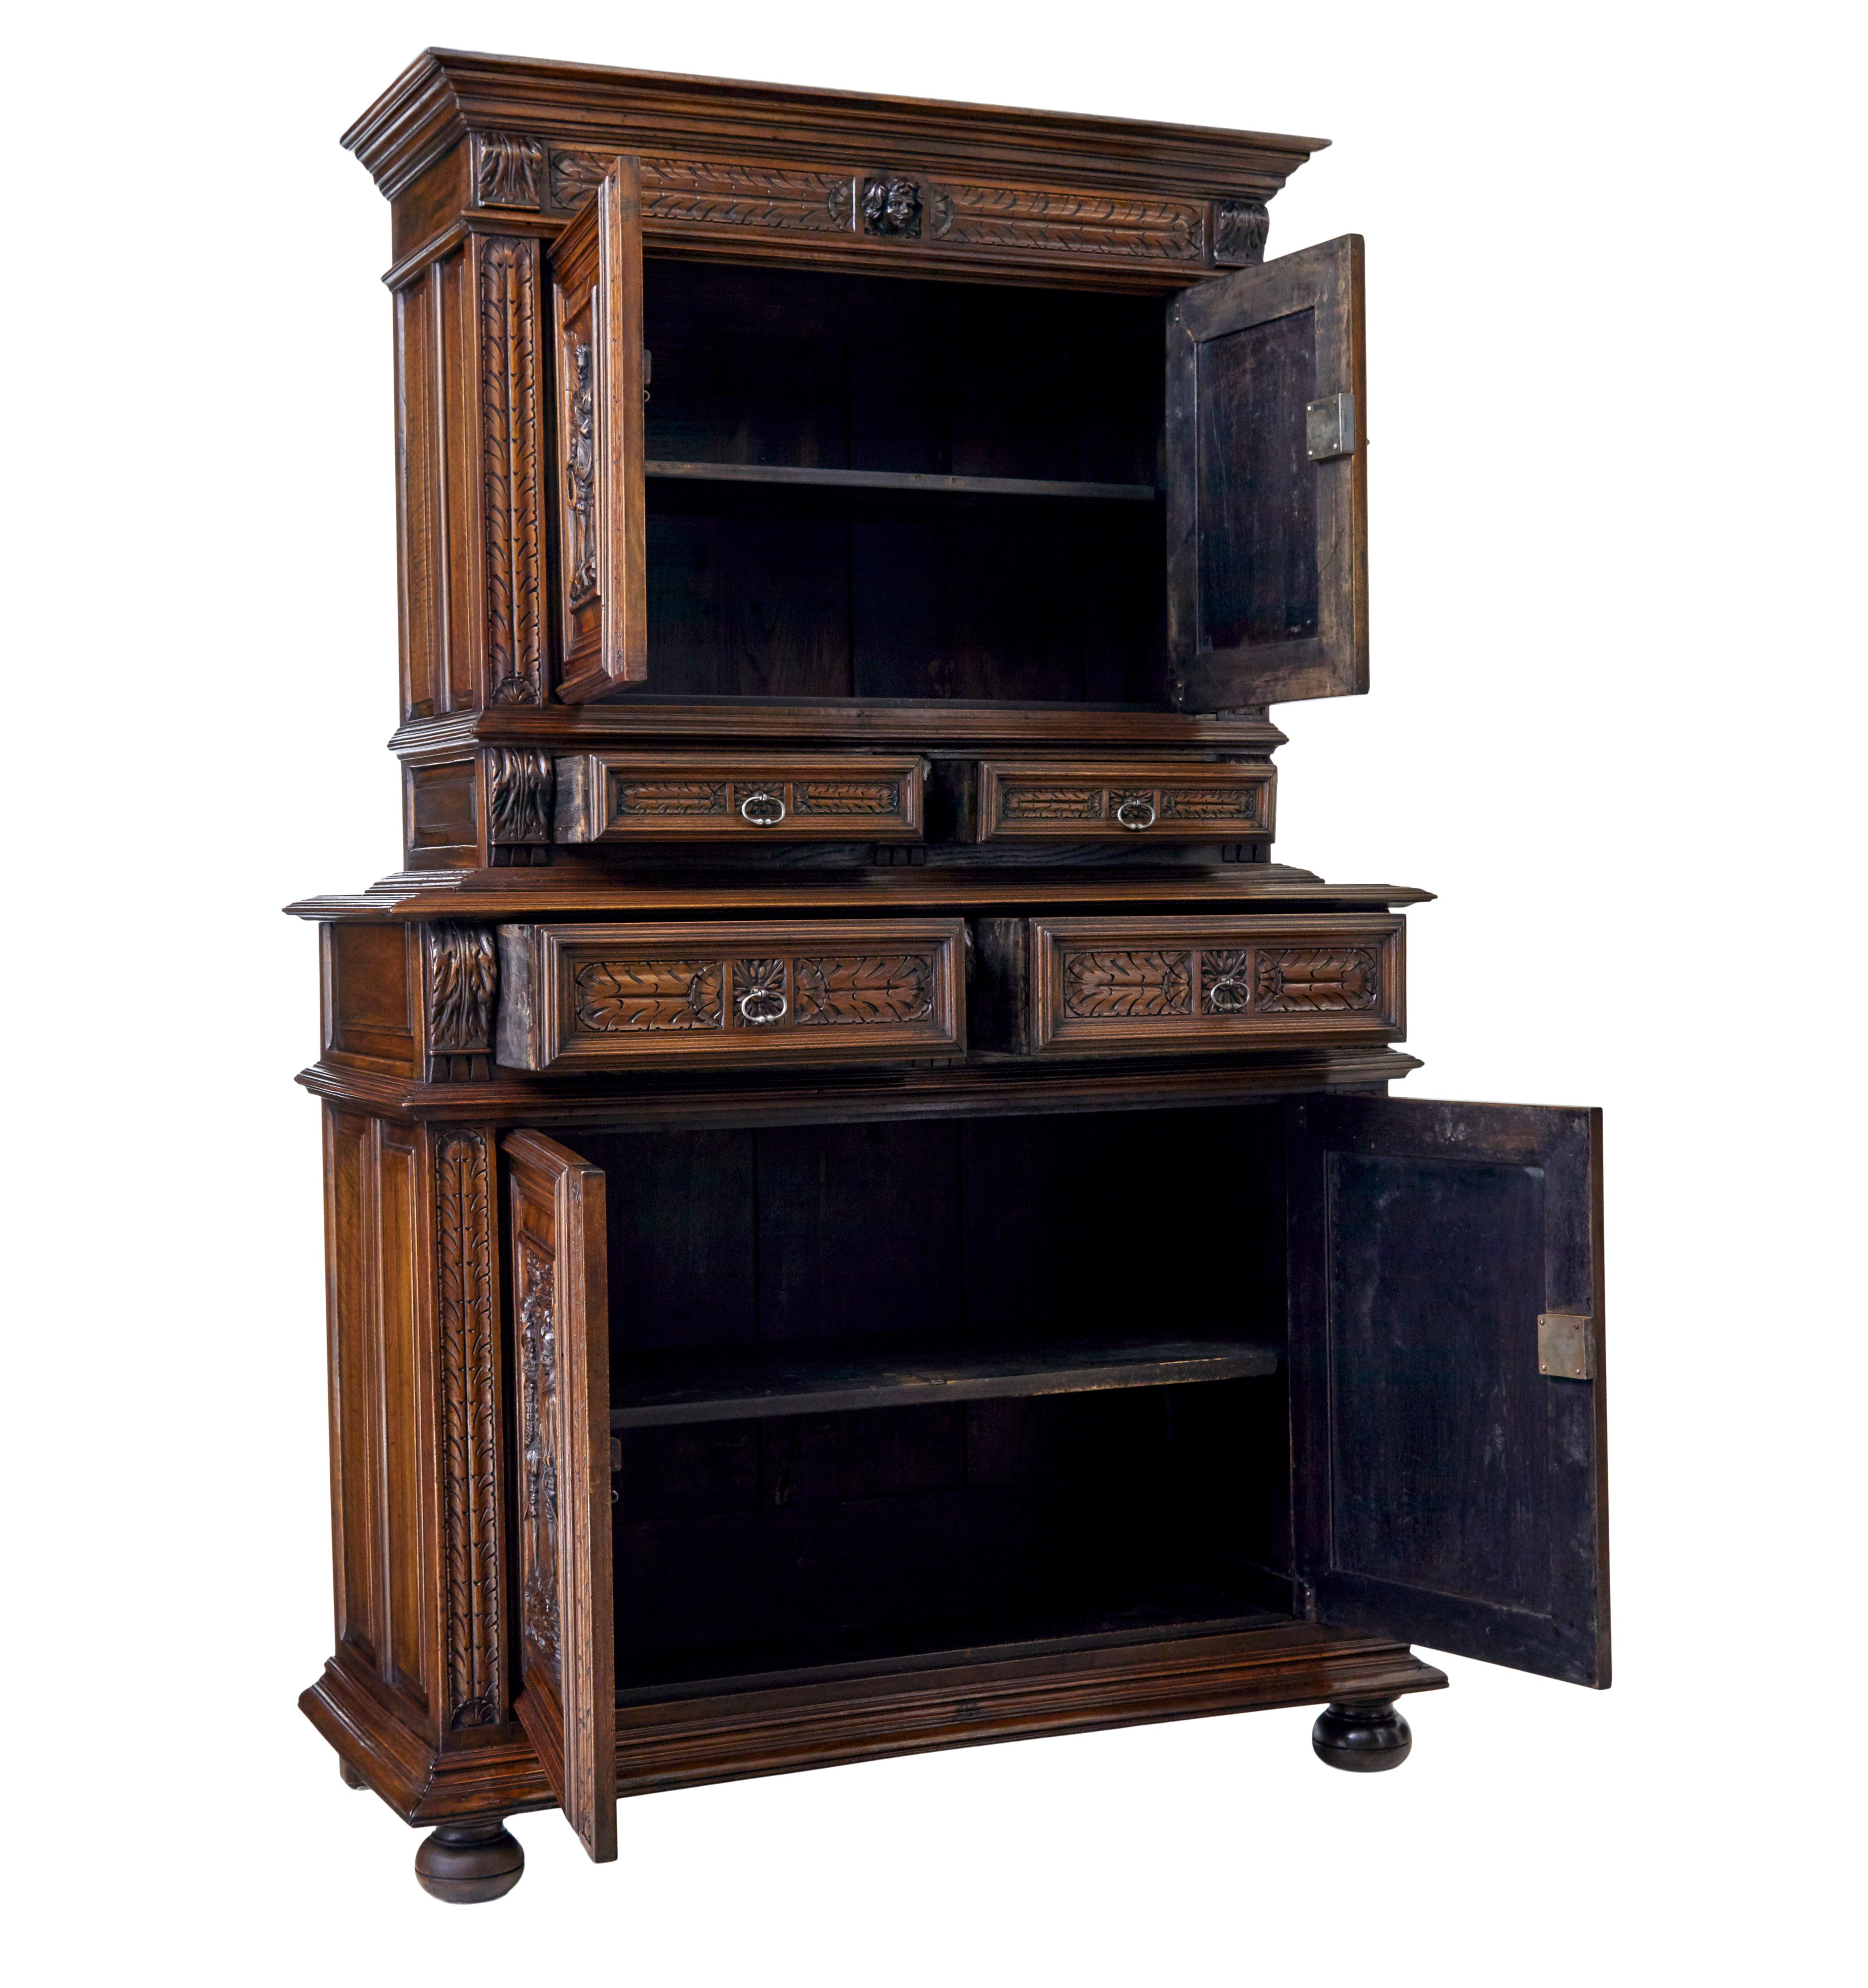 Gothic Revival Mid 19th century carved walnut Italian cabinet For Sale